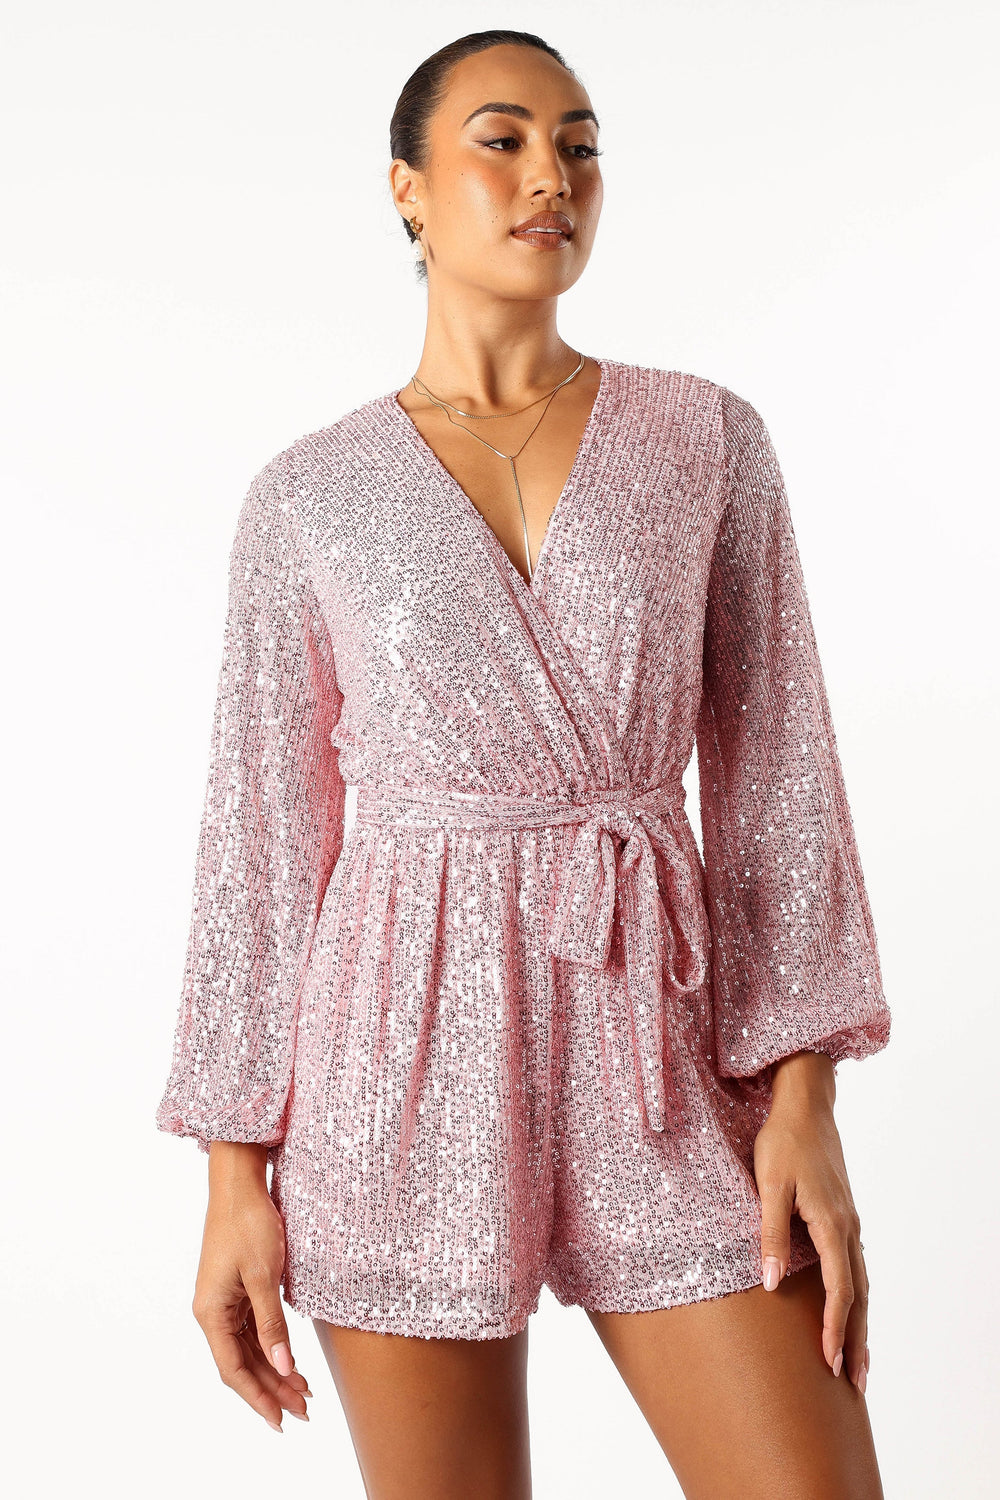 Petal and Pup USA Rompers Monica Sequin Romper - Pink